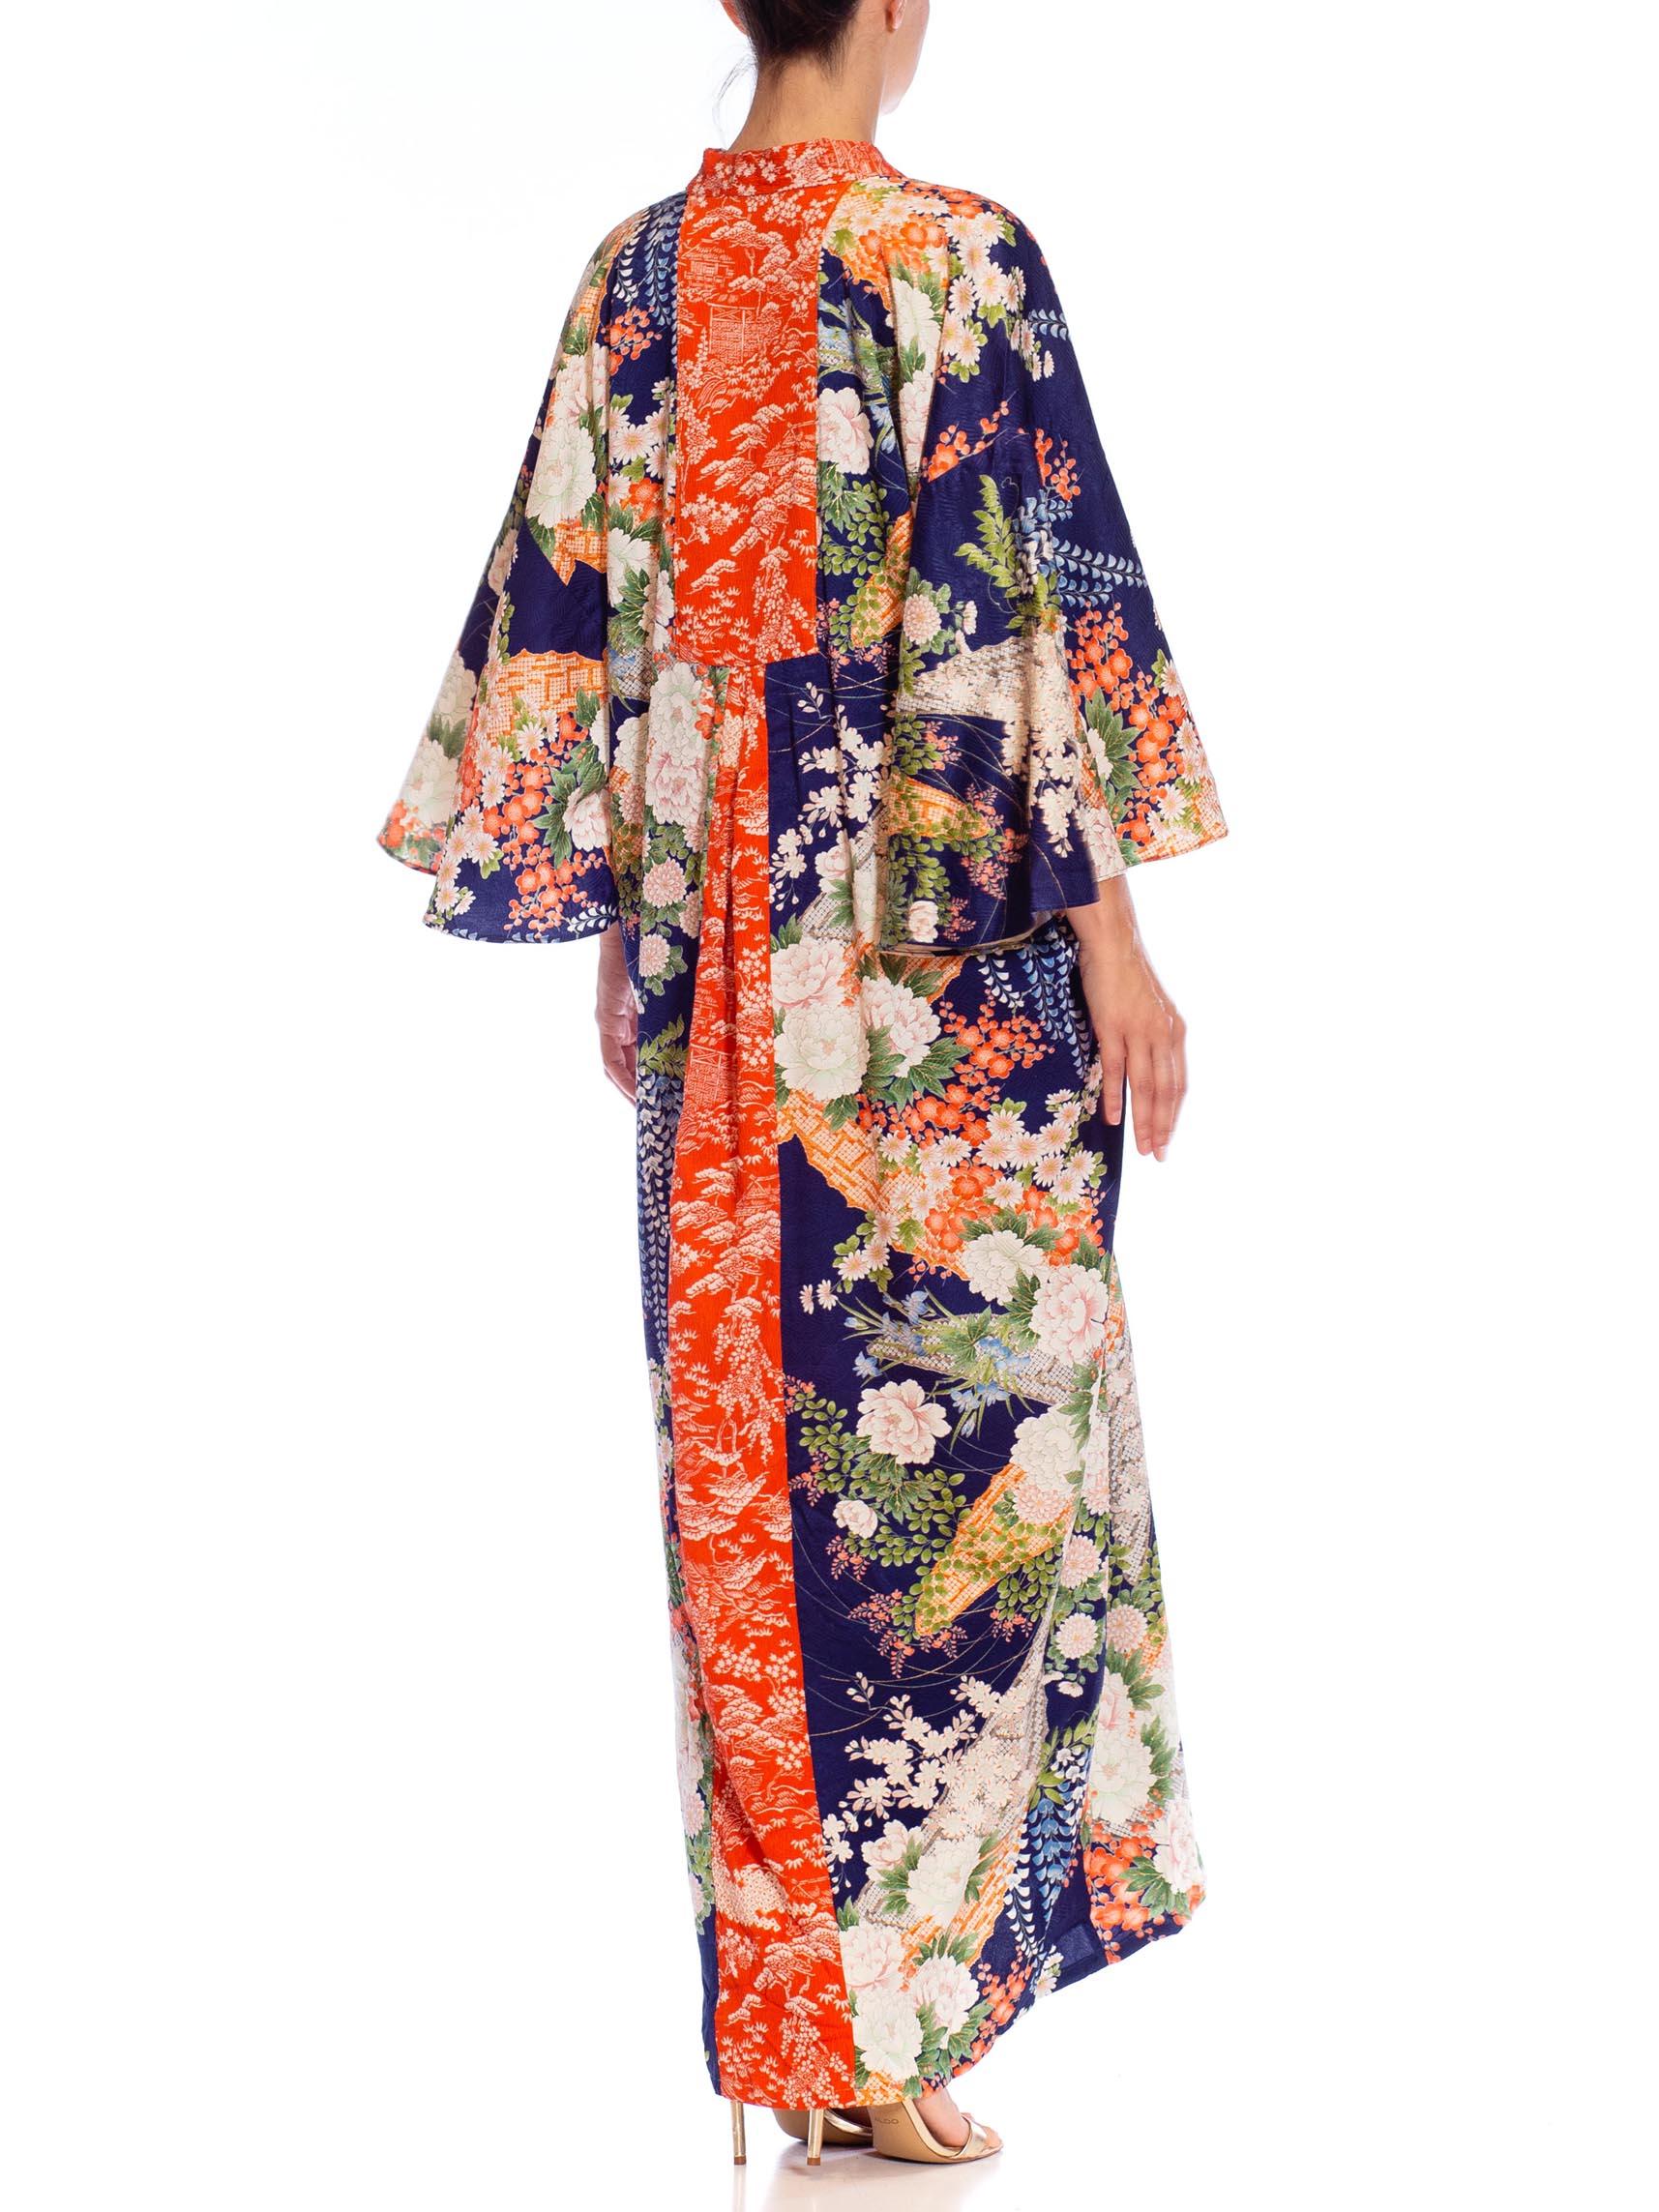 MORPHEW COLLECTION Navy Blue Japanese Kimono Silk Floral Pattern Kaftan Orange  In Excellent Condition For Sale In New York, NY